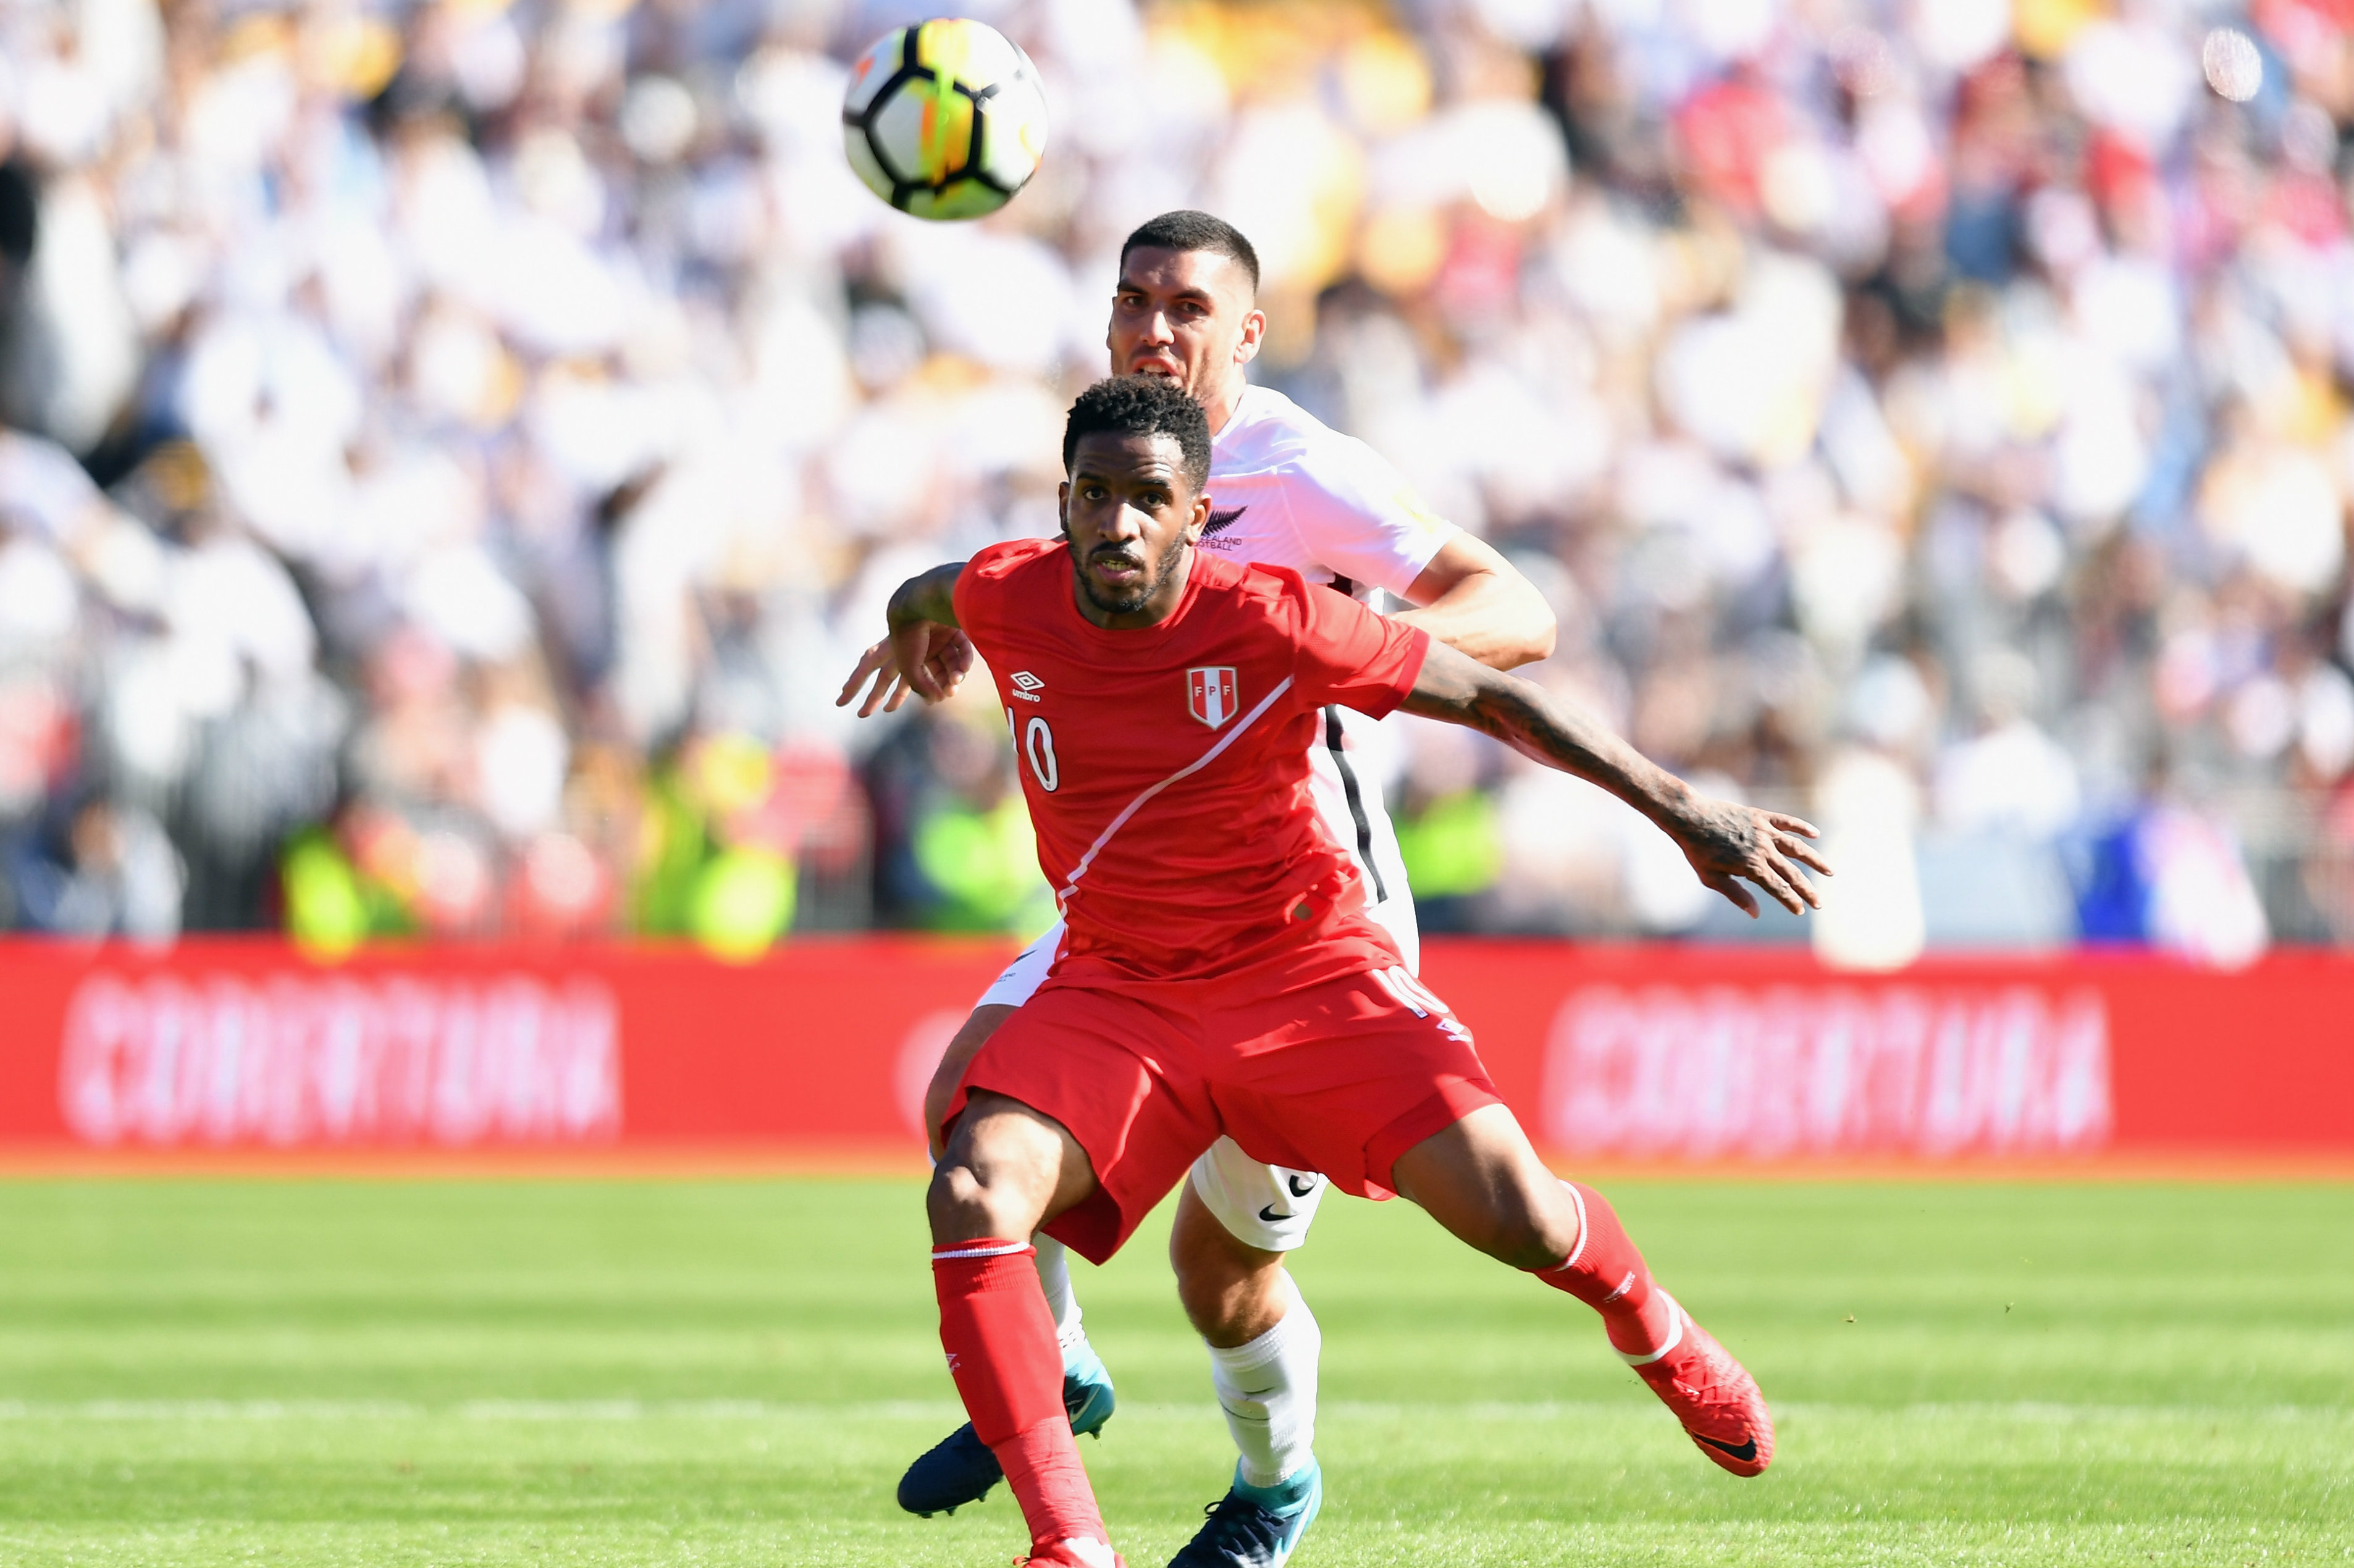 Jefferson Farfan scored a crucial goal in Peru's playoff win over the All Whites.